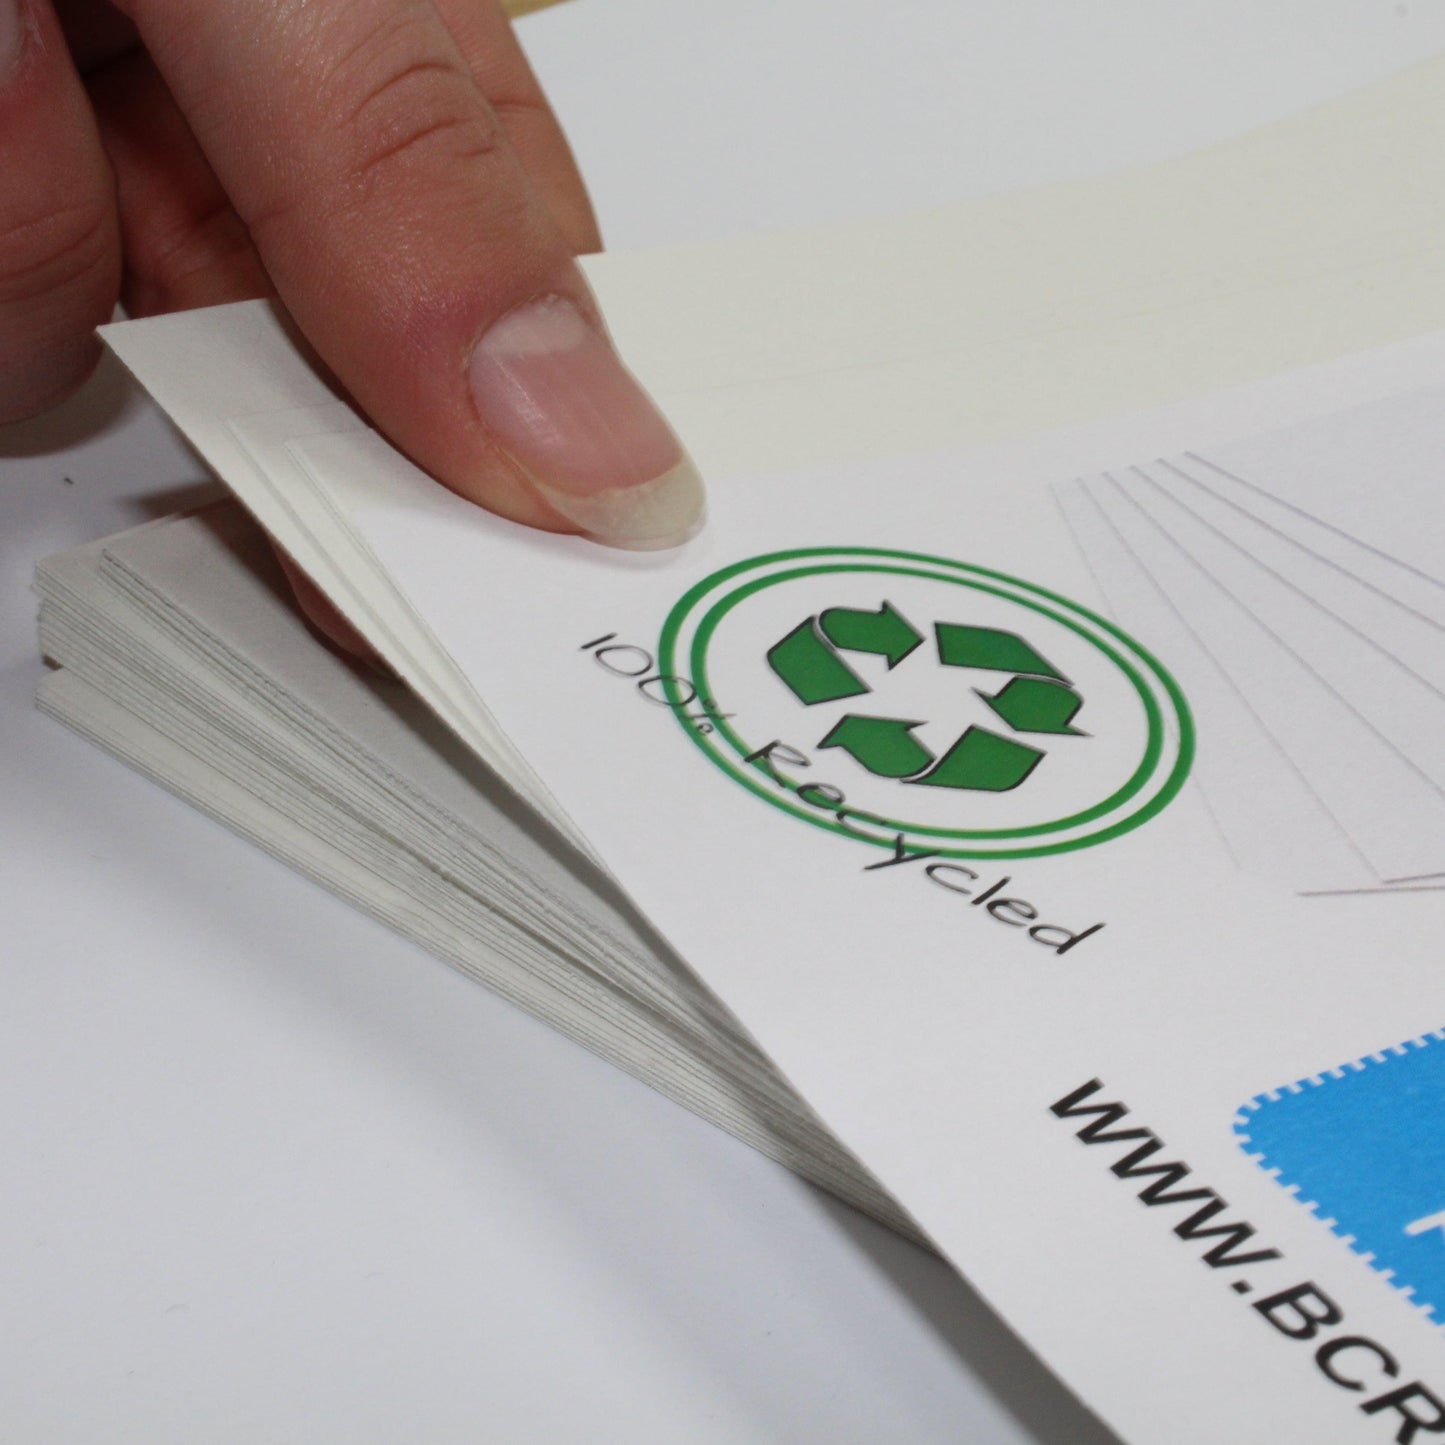 100% Recycled A4 White Card 220gsm Choose Quantity